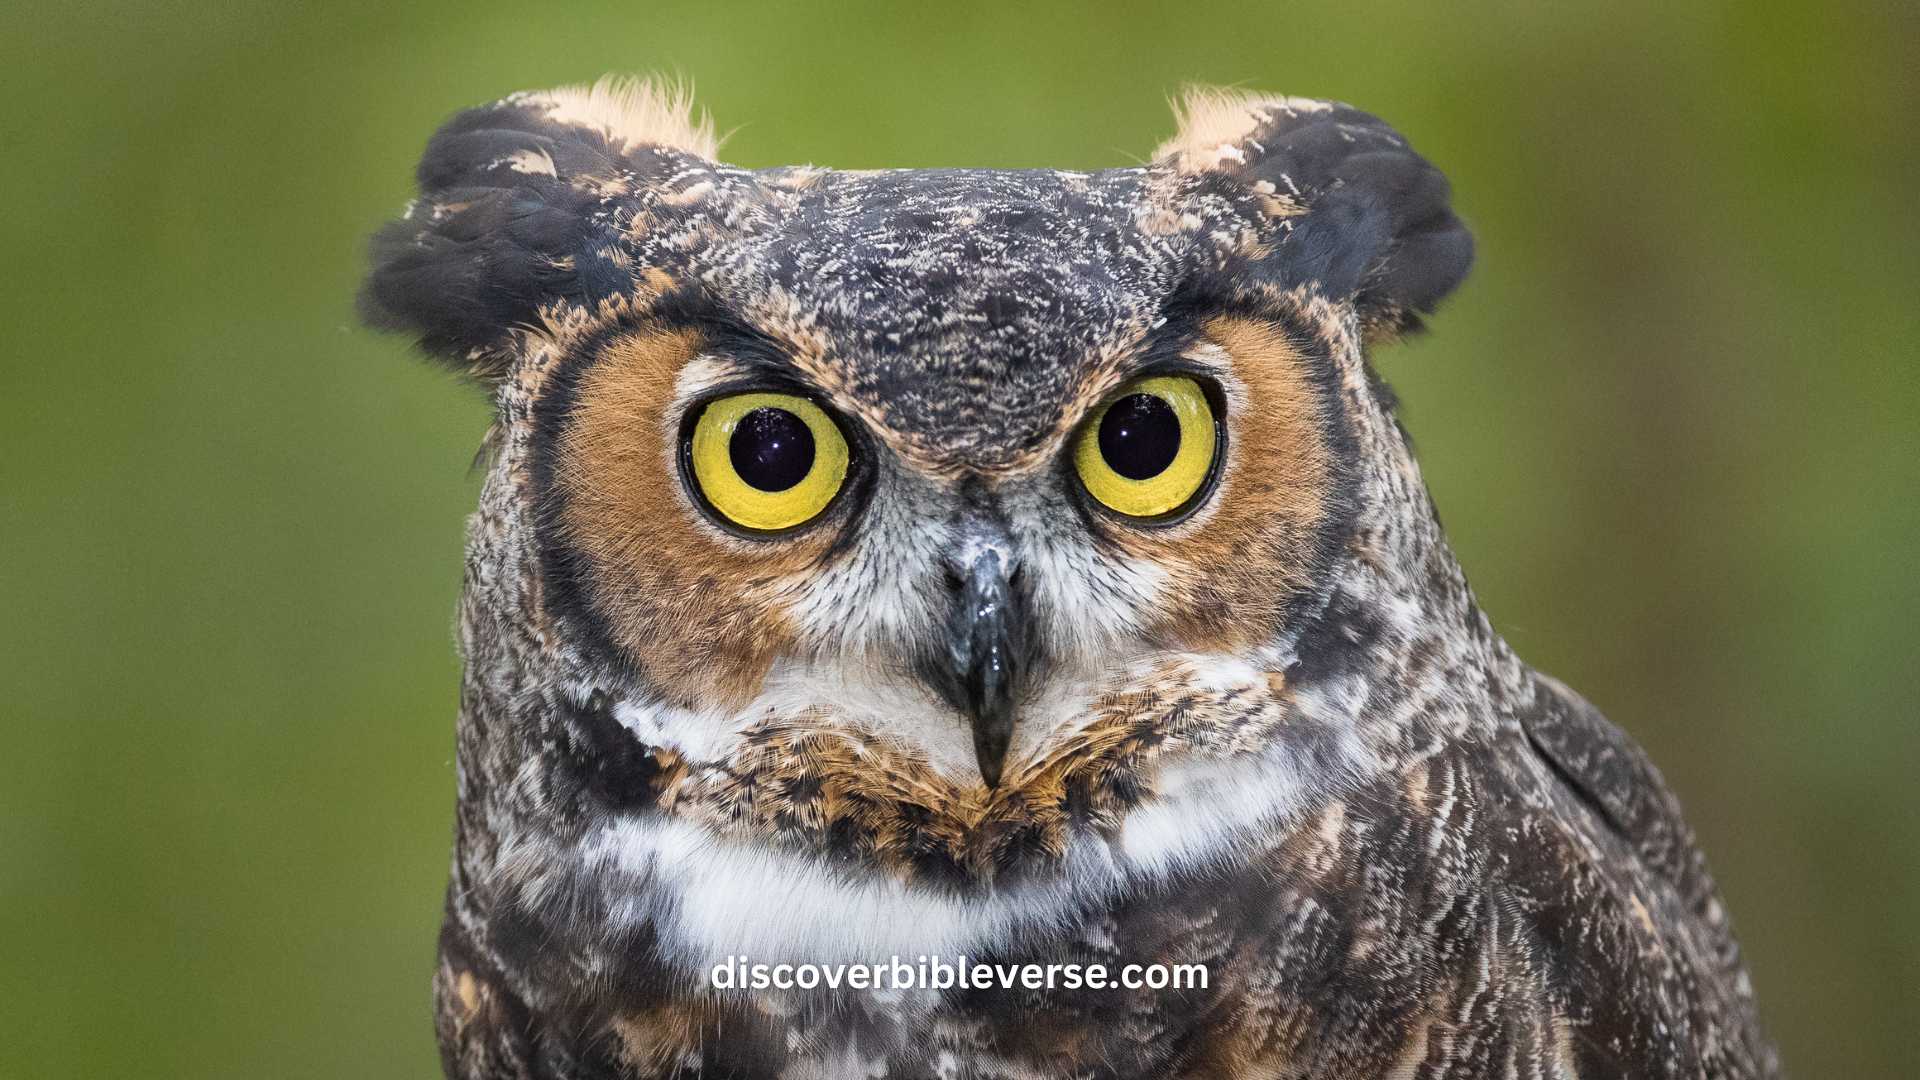 What Does the Owl Symbolize in the Bible?